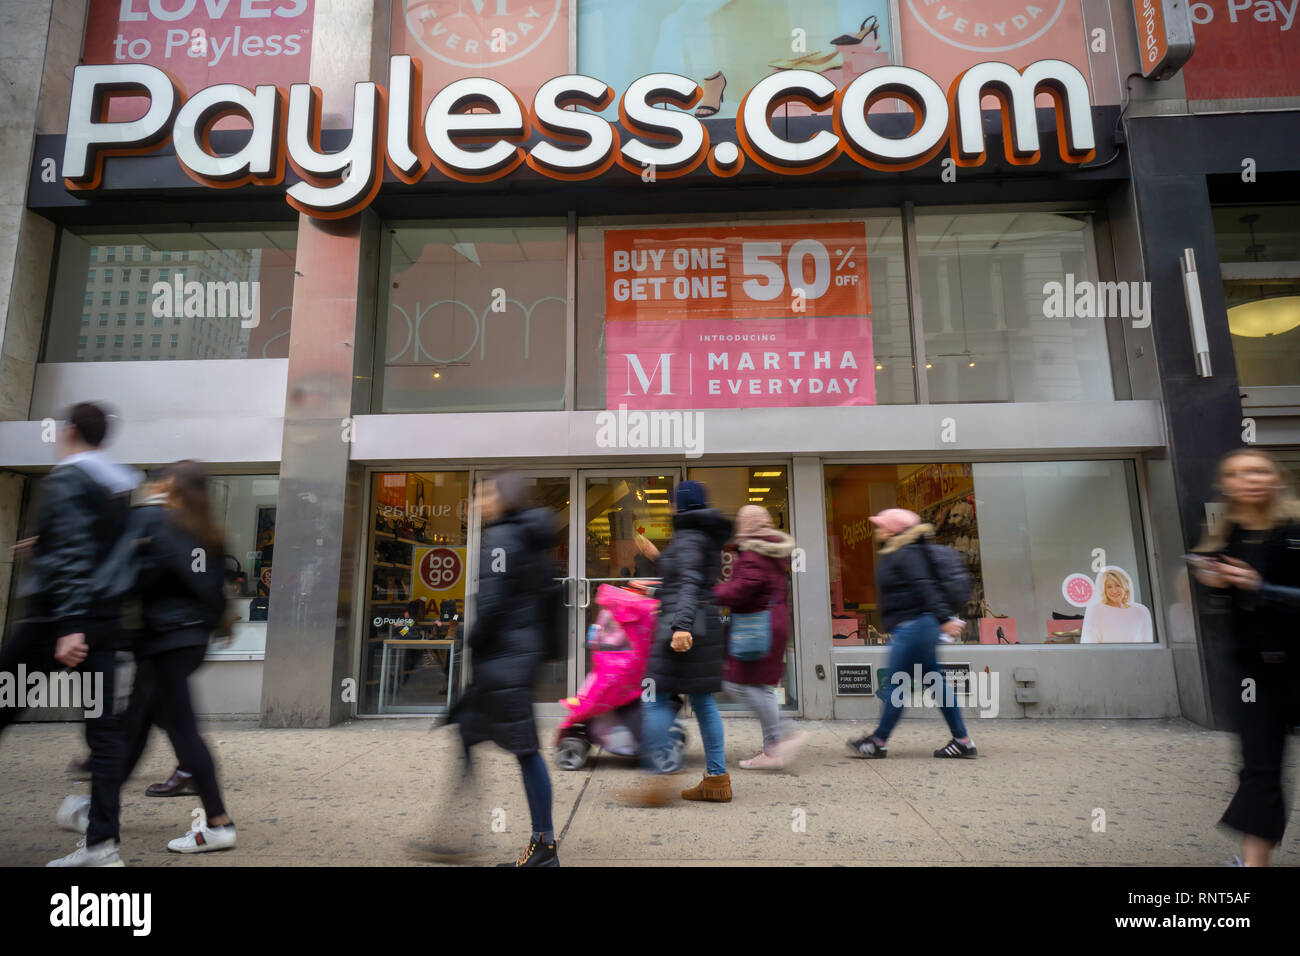 A Payless ShoeSource store in Herald Square in New York on Friday, February 15, 2019. The retailer is reported to be planning to close all 2300 stores as it files for bankruptcy at the end of February unless a buyer for the chain materializes. (© Richard B. Levine) Stock Photo